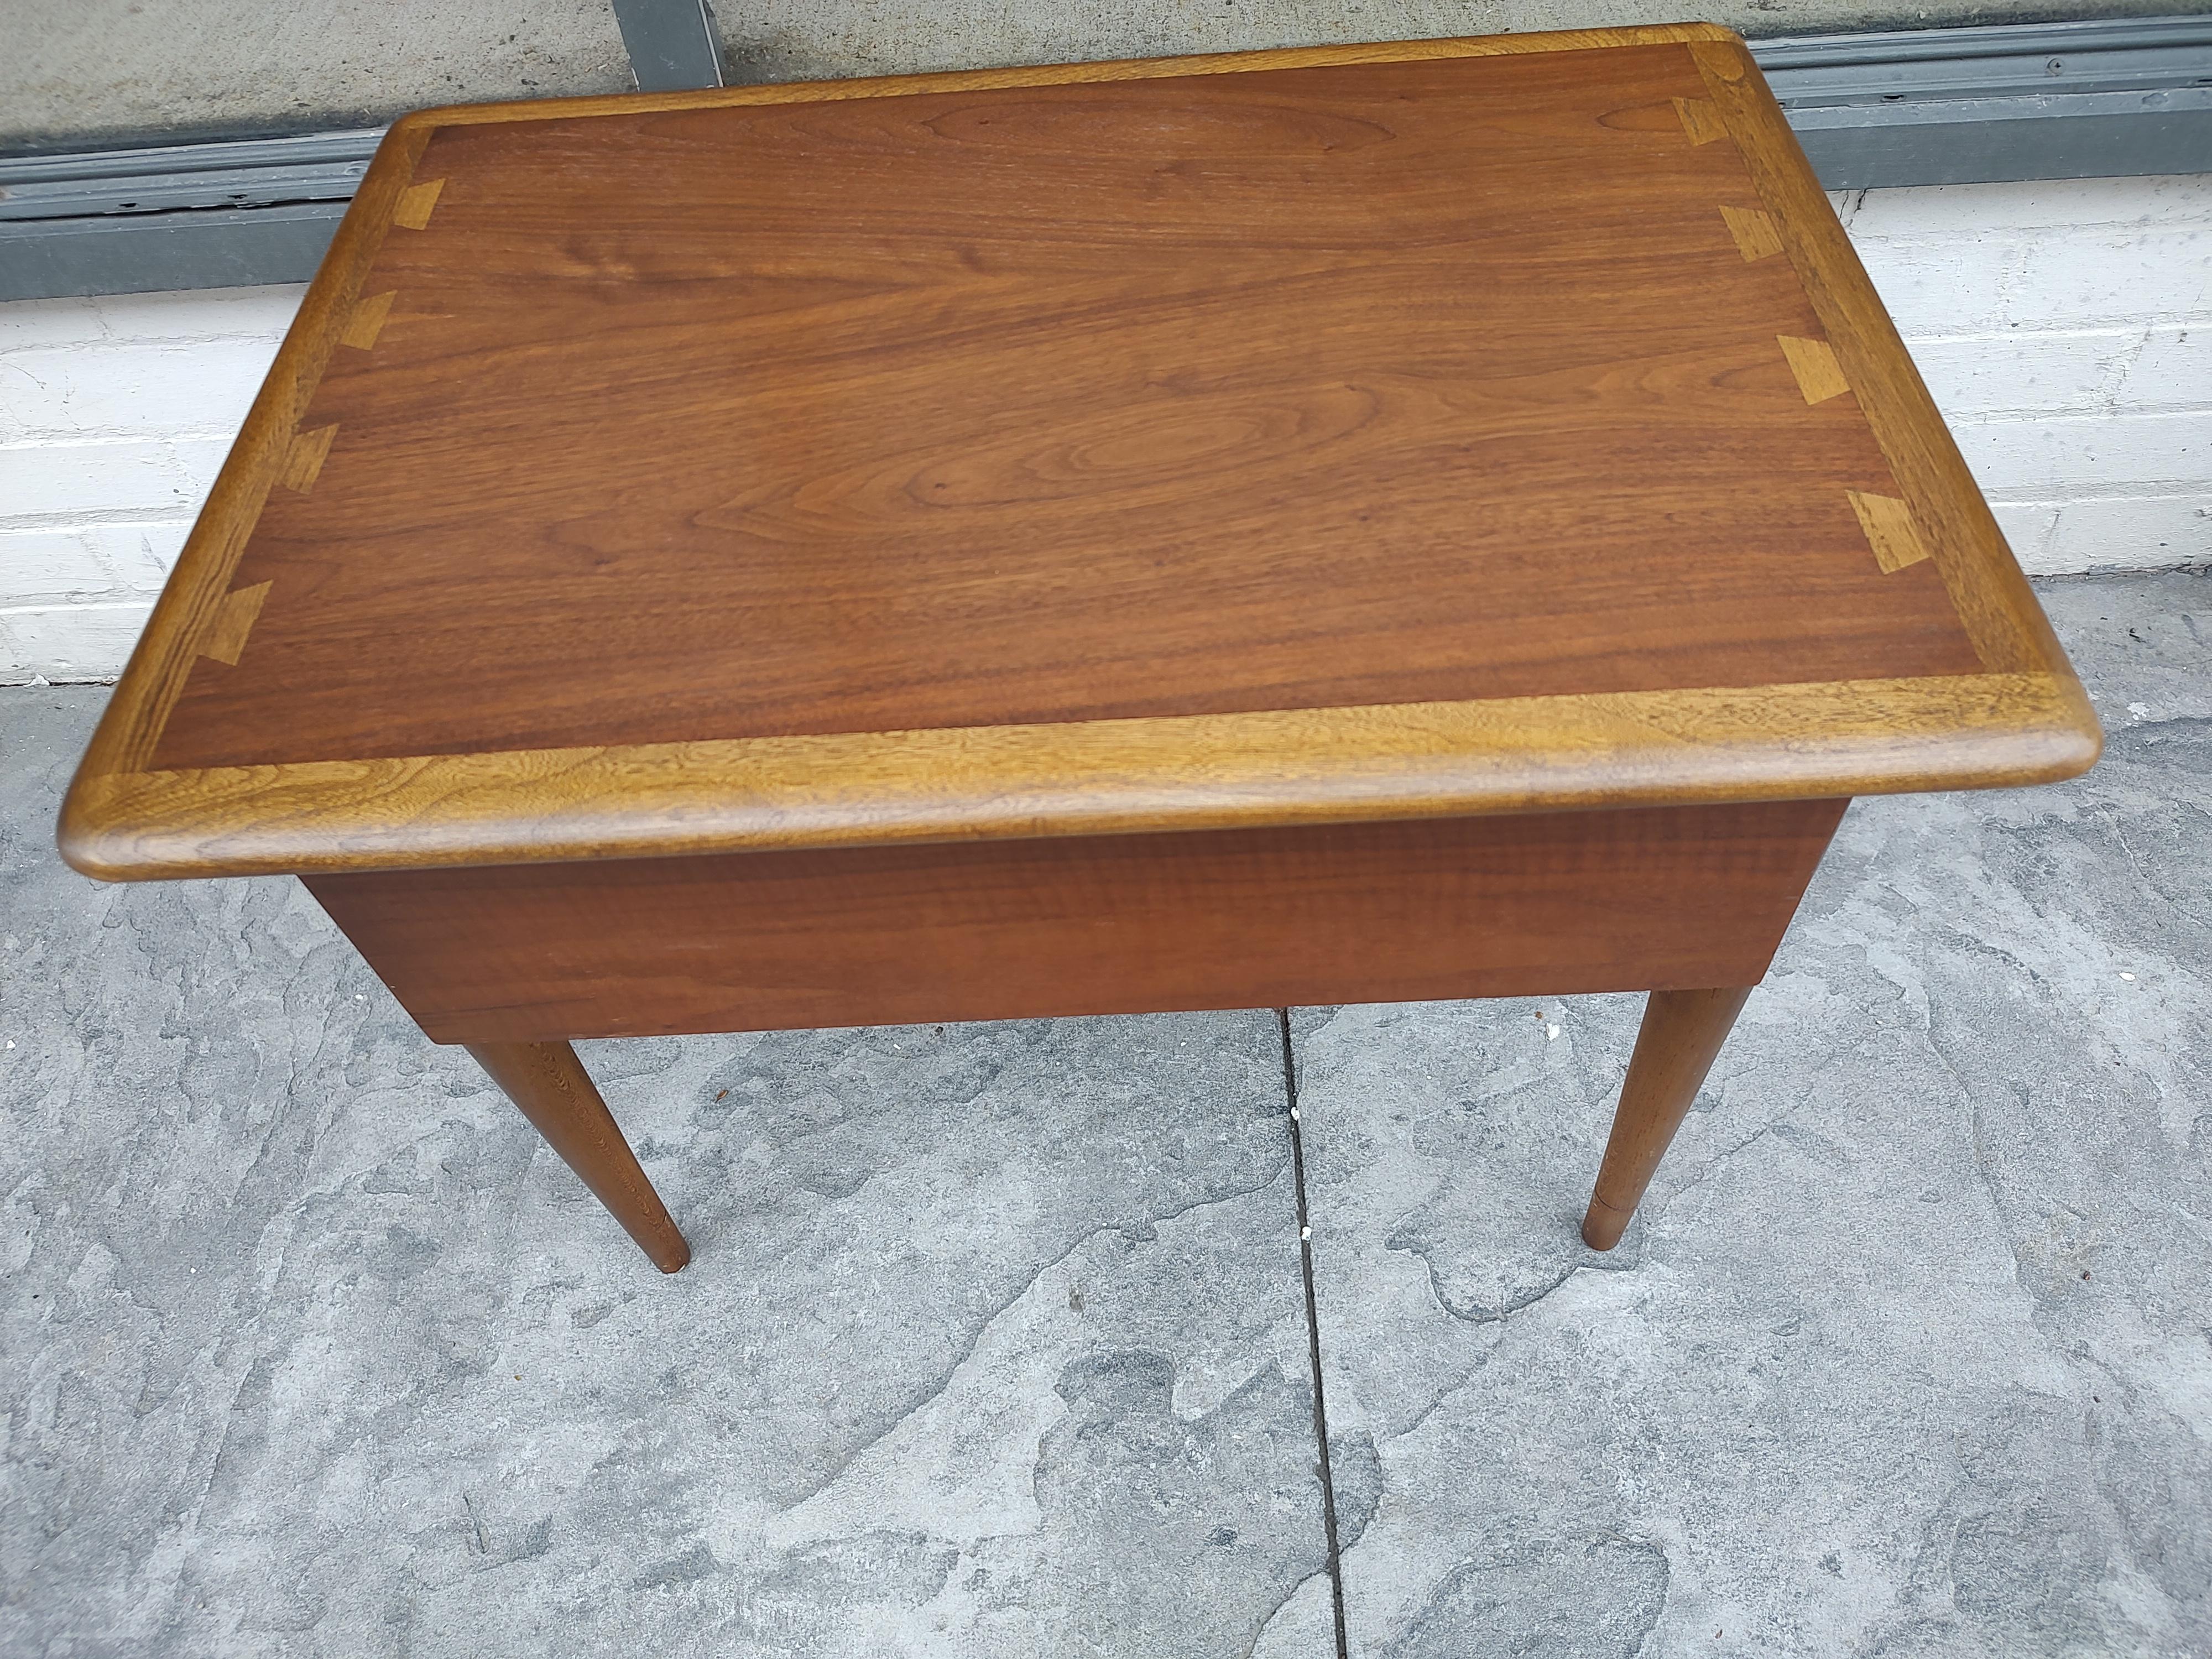 Simple and elegant night Stand by Lane. Acclaim single drawer stand with large dovetail details. Has been recently refinished. Can be parcel posted.